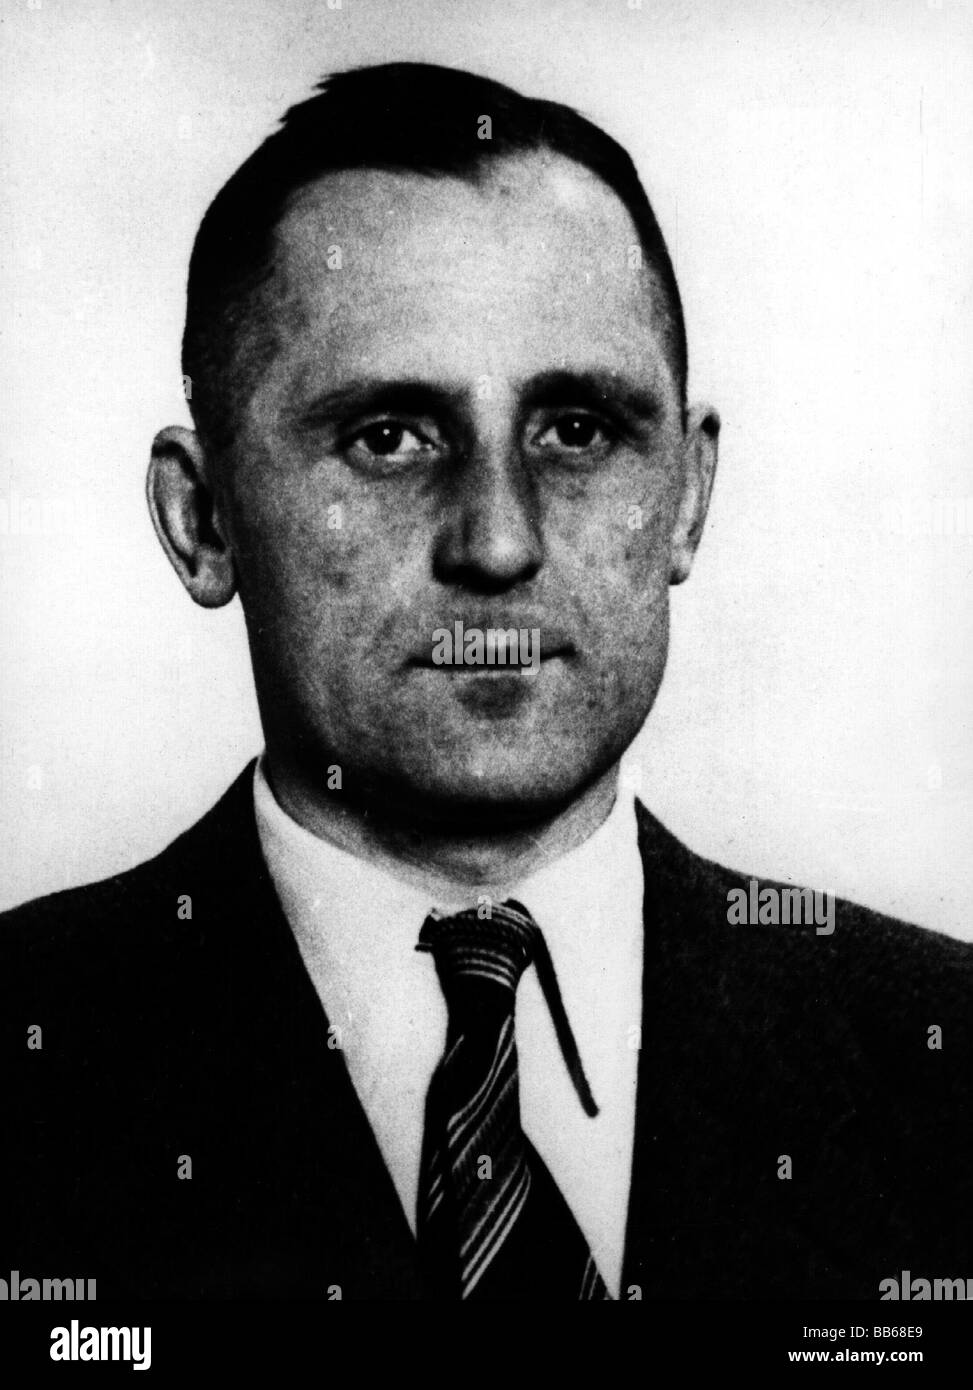 Müller, Heinrich,  28.4.1900 - 1945?, German official, Chief of the  Gestapo 1942 - 1945, portrait, 1940s, 40s, Member of SS & NSDAP, police, Germany, Third Reich, nazi, nazism, Muller, Mueller, 20th century, , Stock Photo